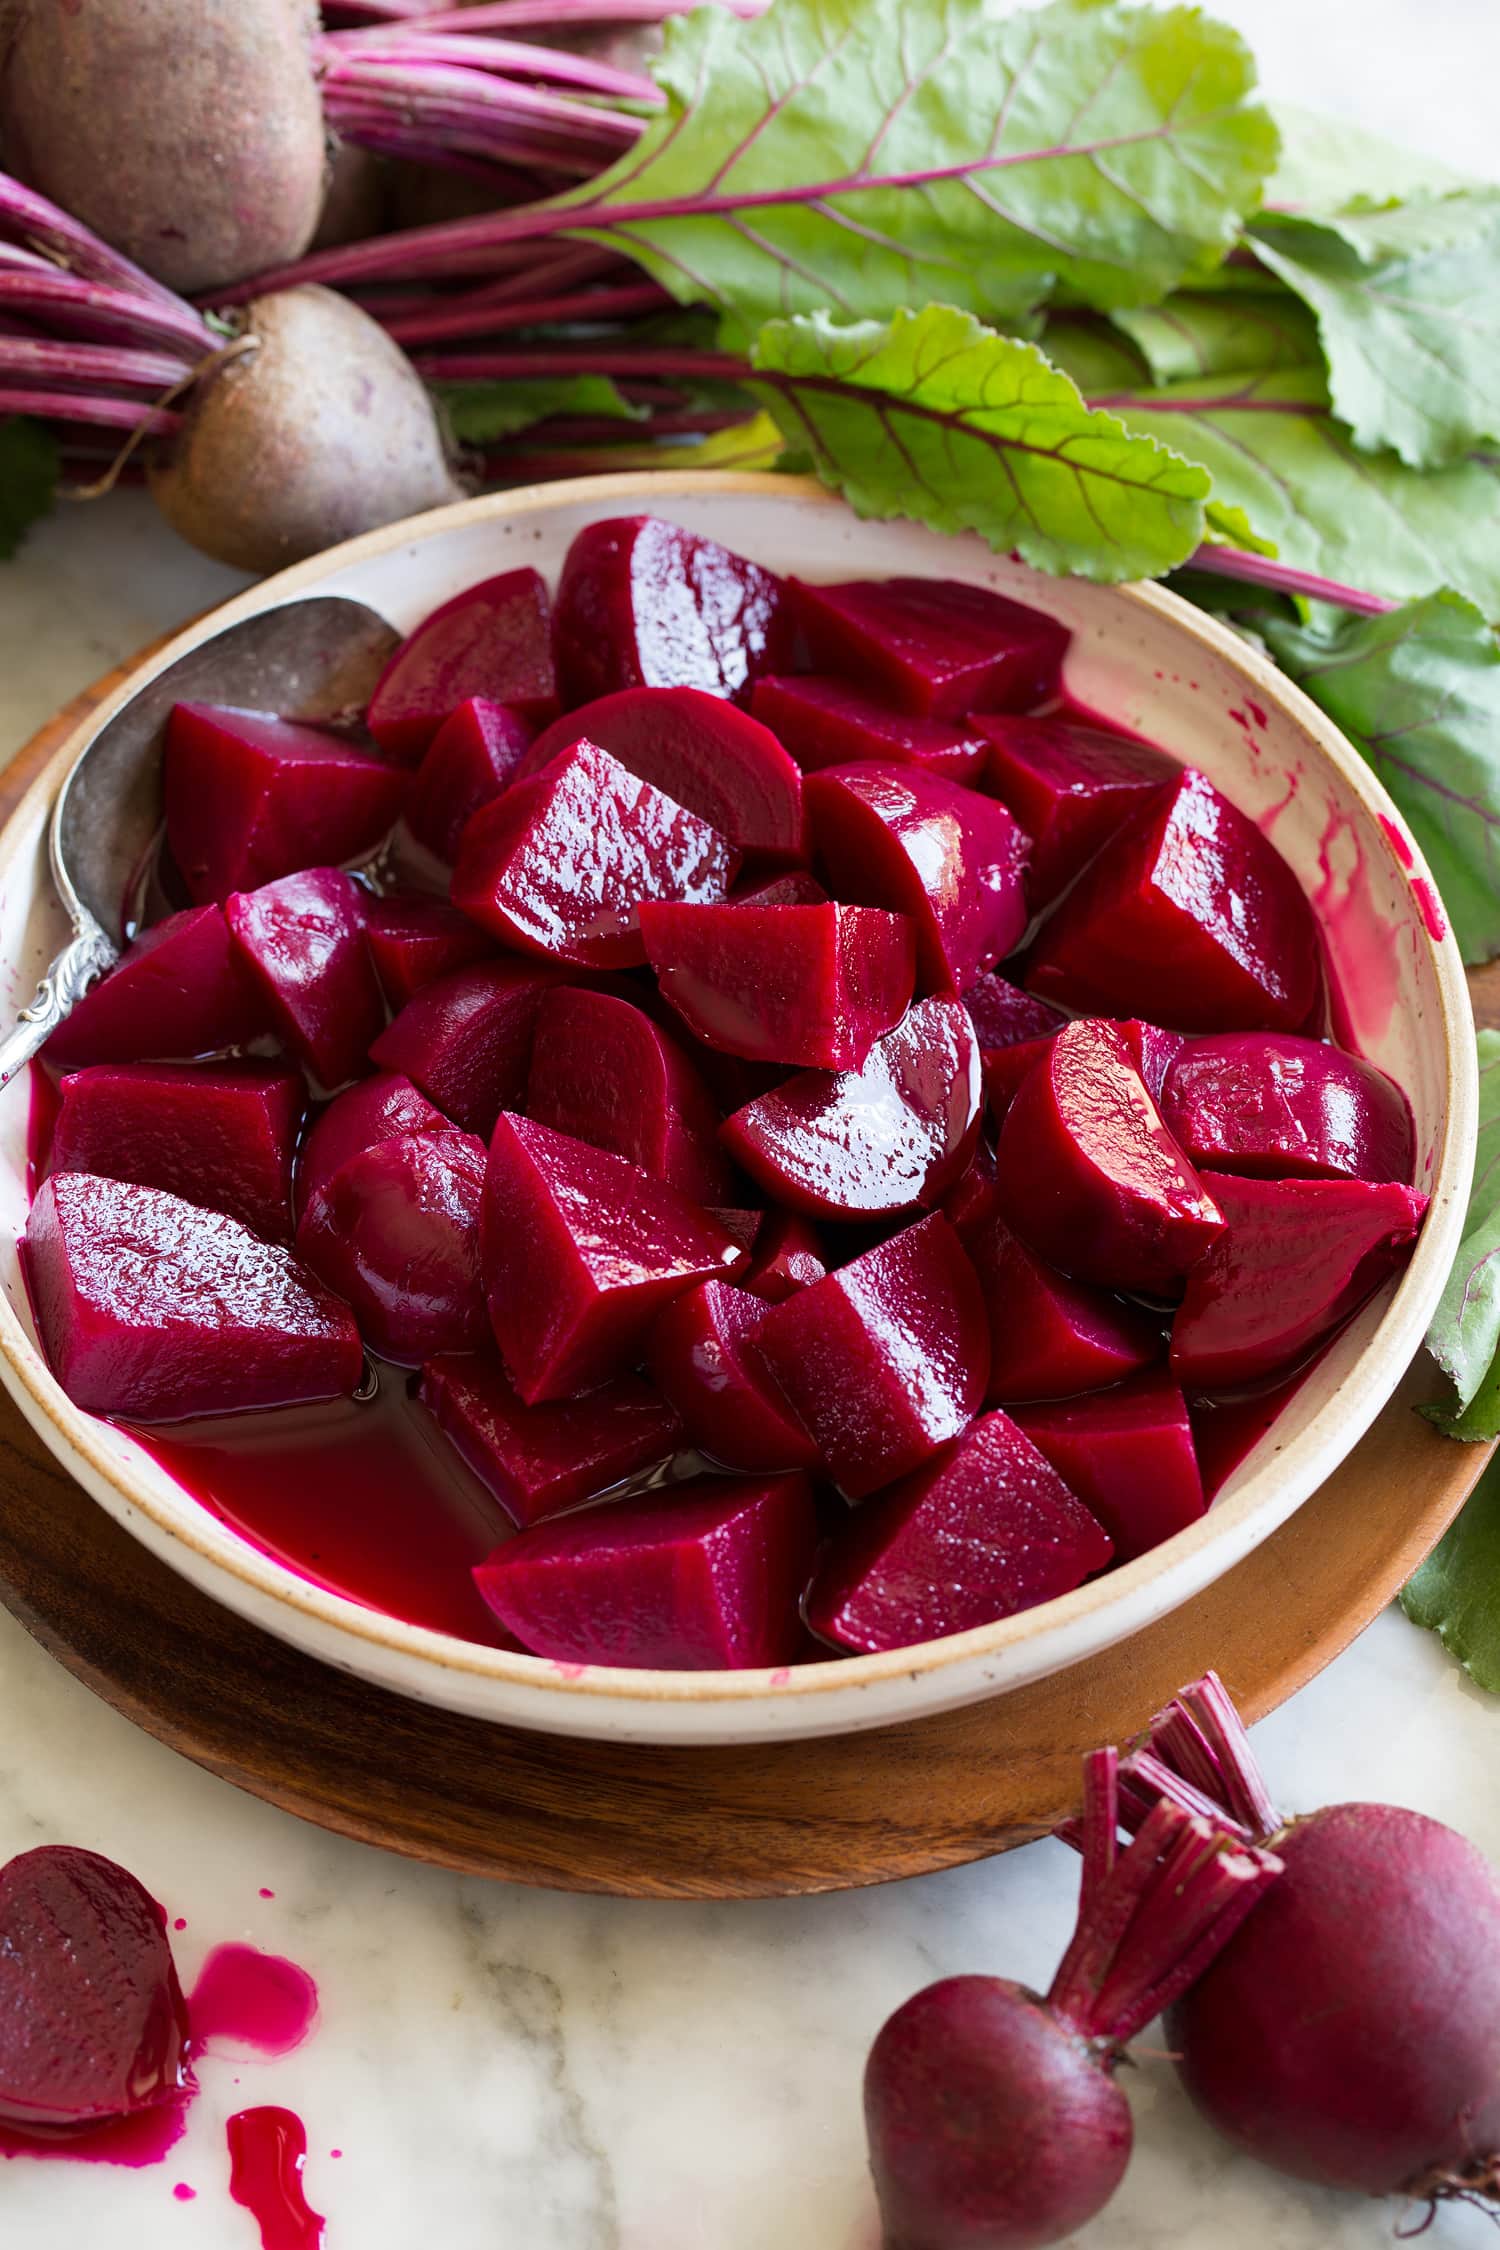 Chopped homemade pickled beets shown in a bowl surrounded by fresh beets.